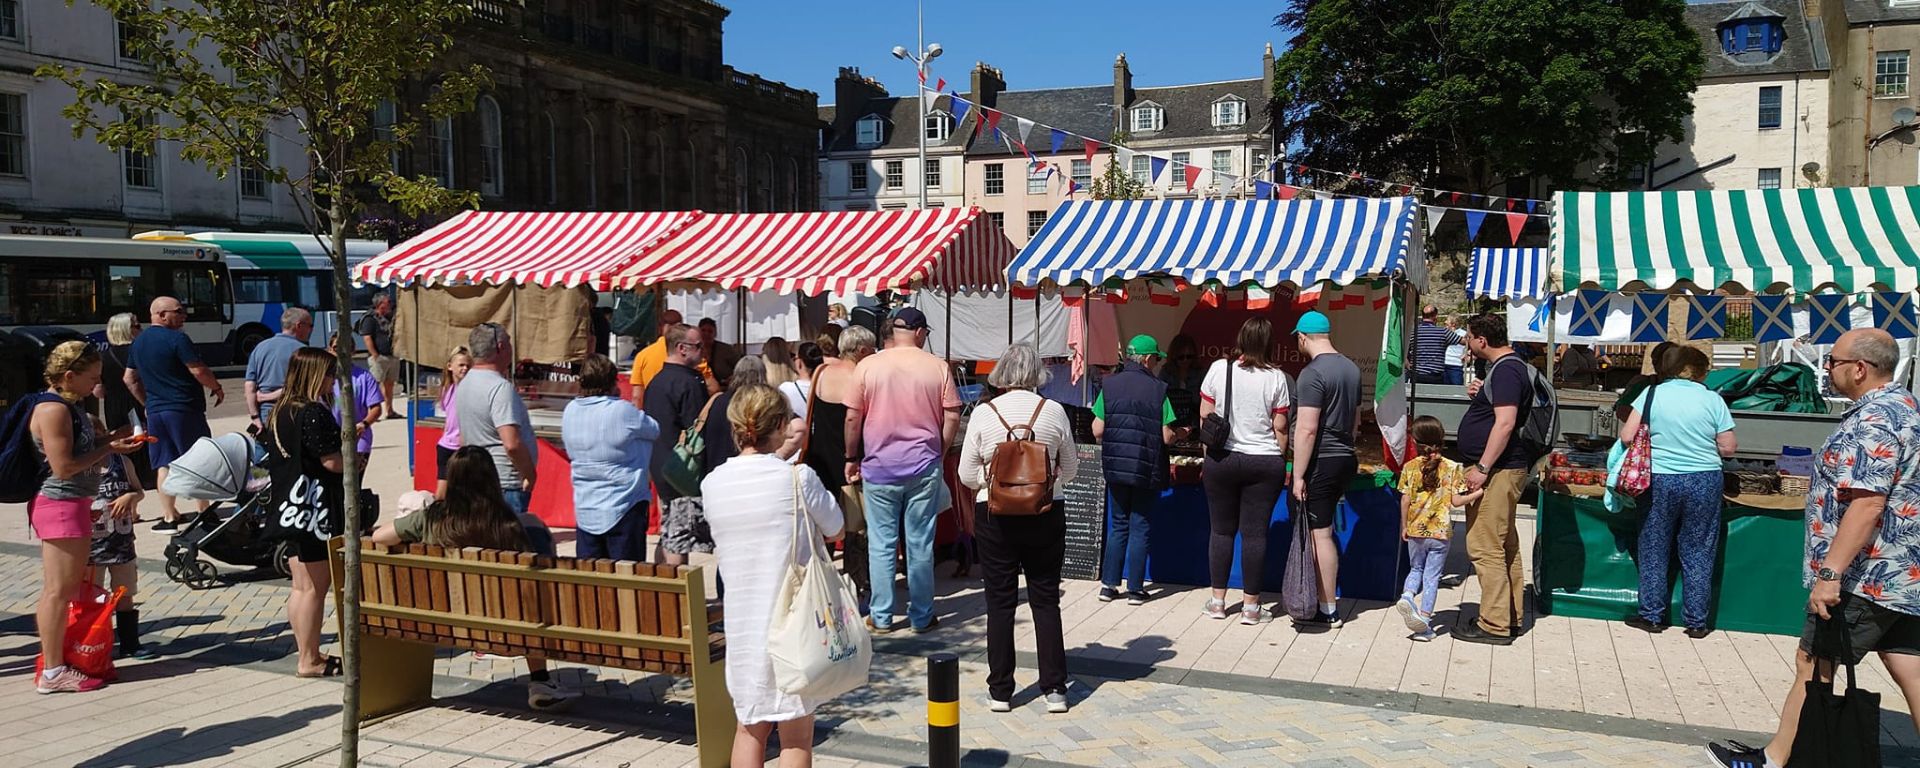 Bright sunny day on town square with busy market stalls.